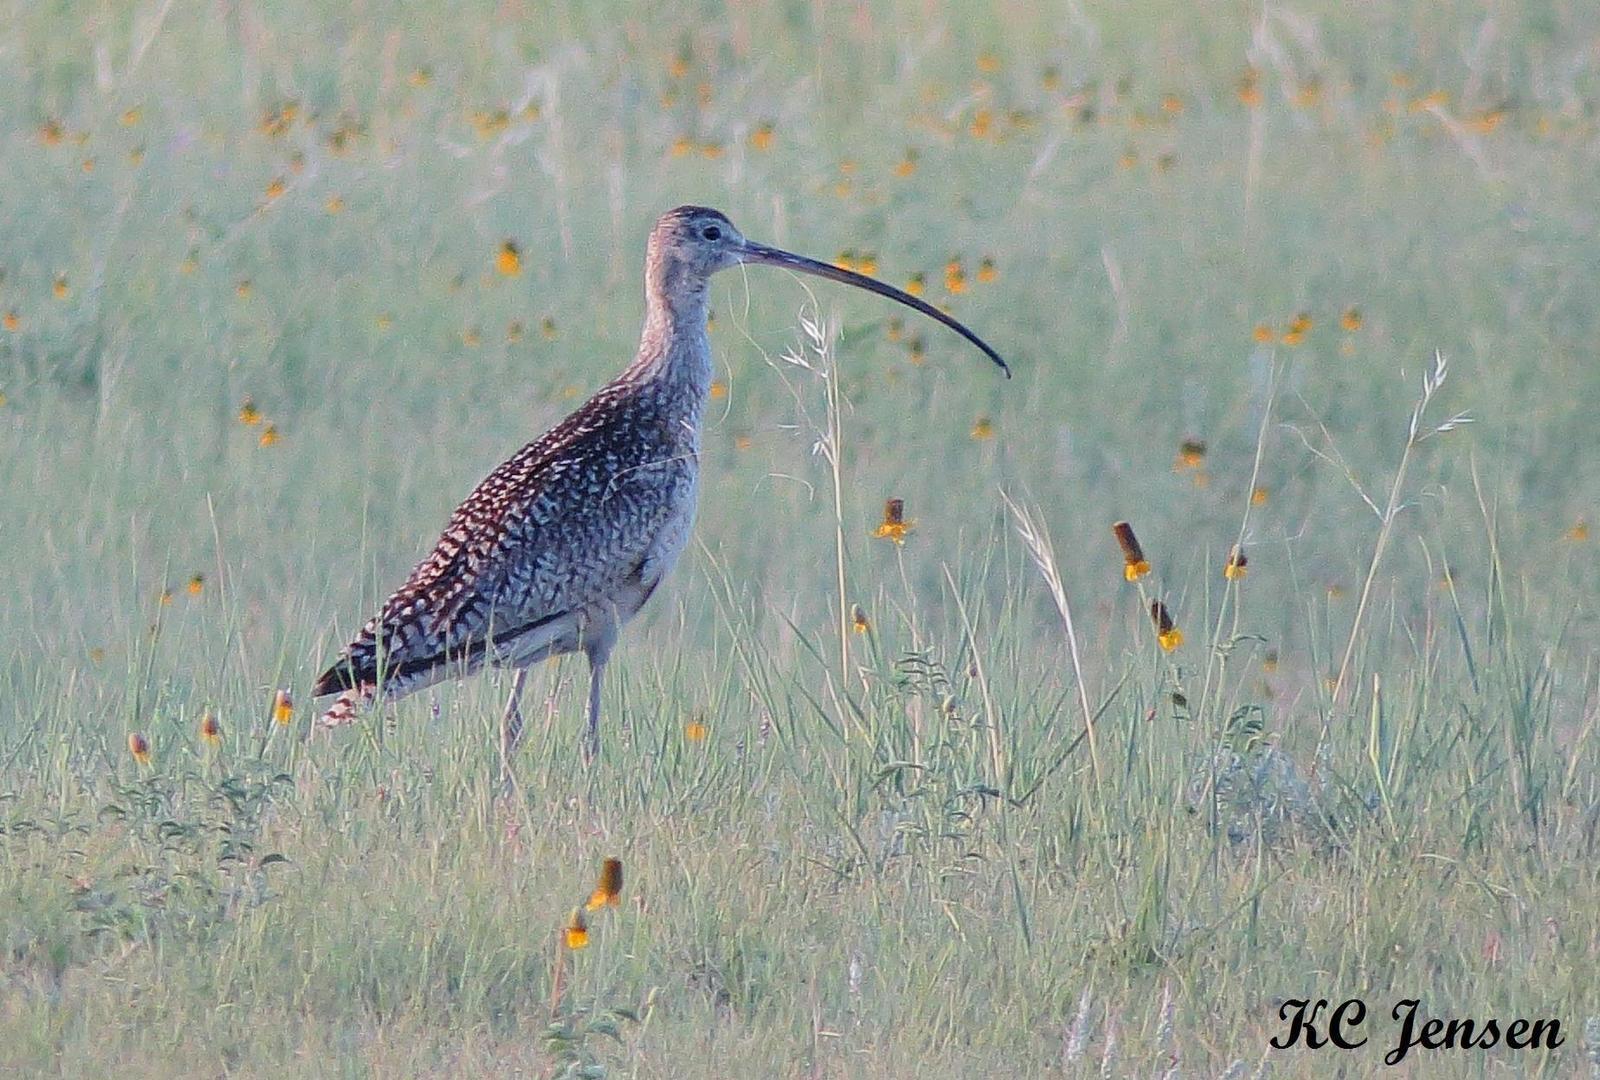 Long-billed Curlew Photo by Kent Jensen